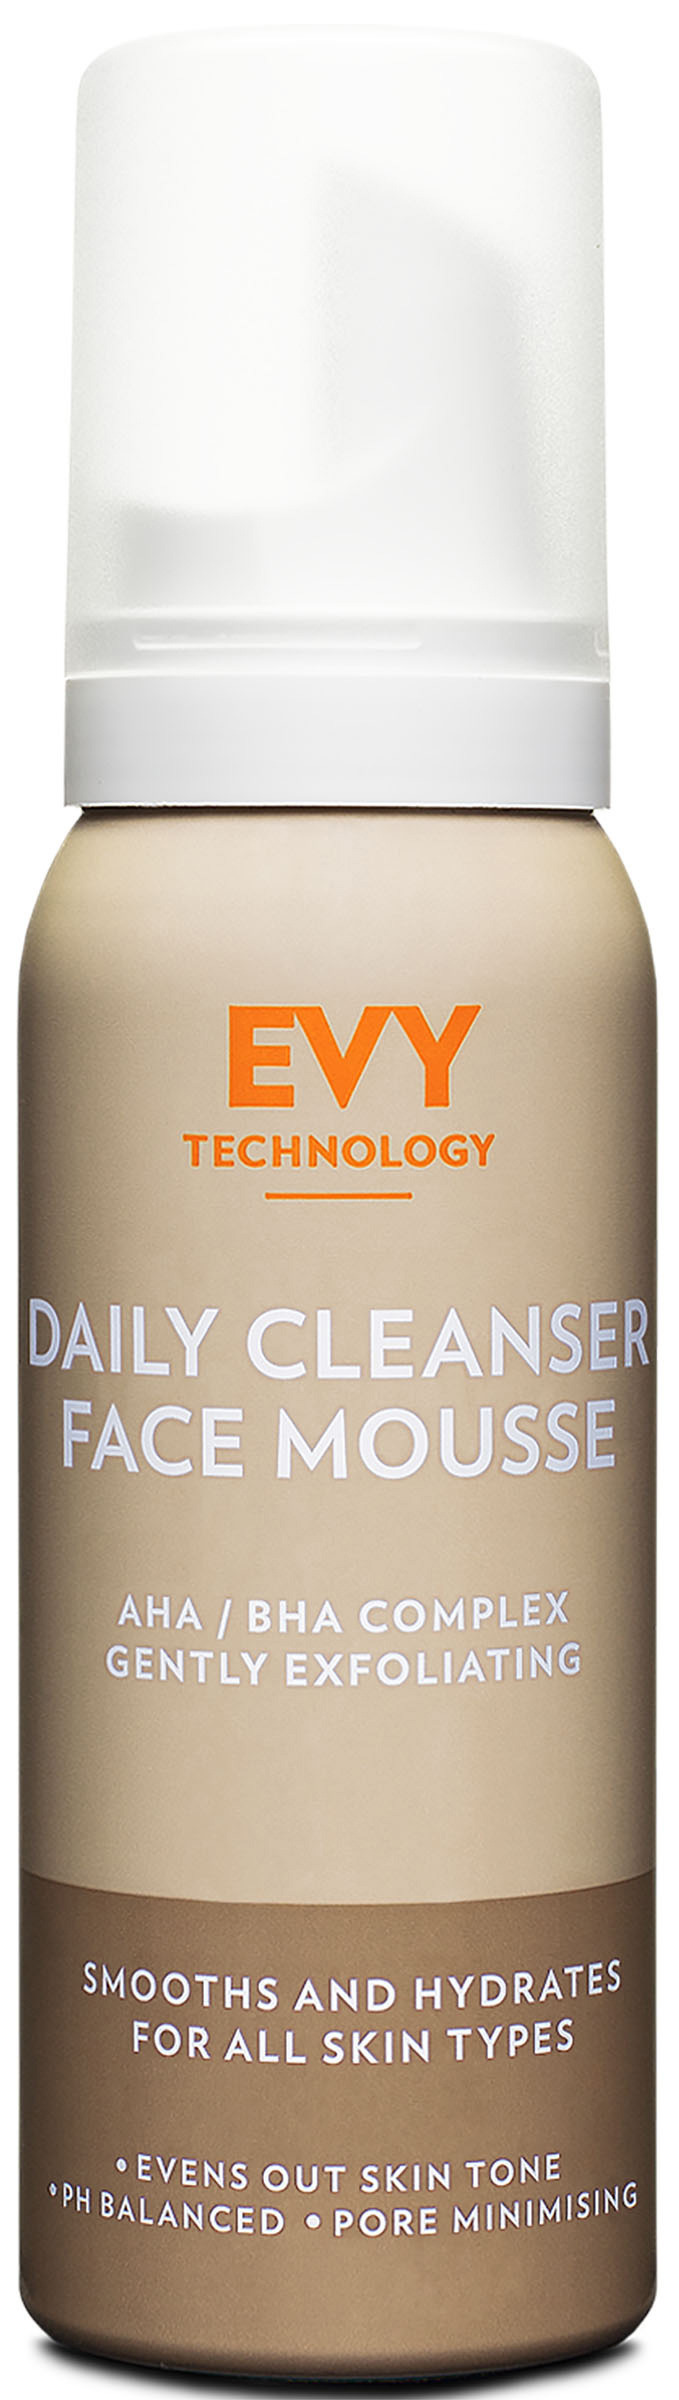 Evy Technology Daily Cleanser Face Mousse 100 ml